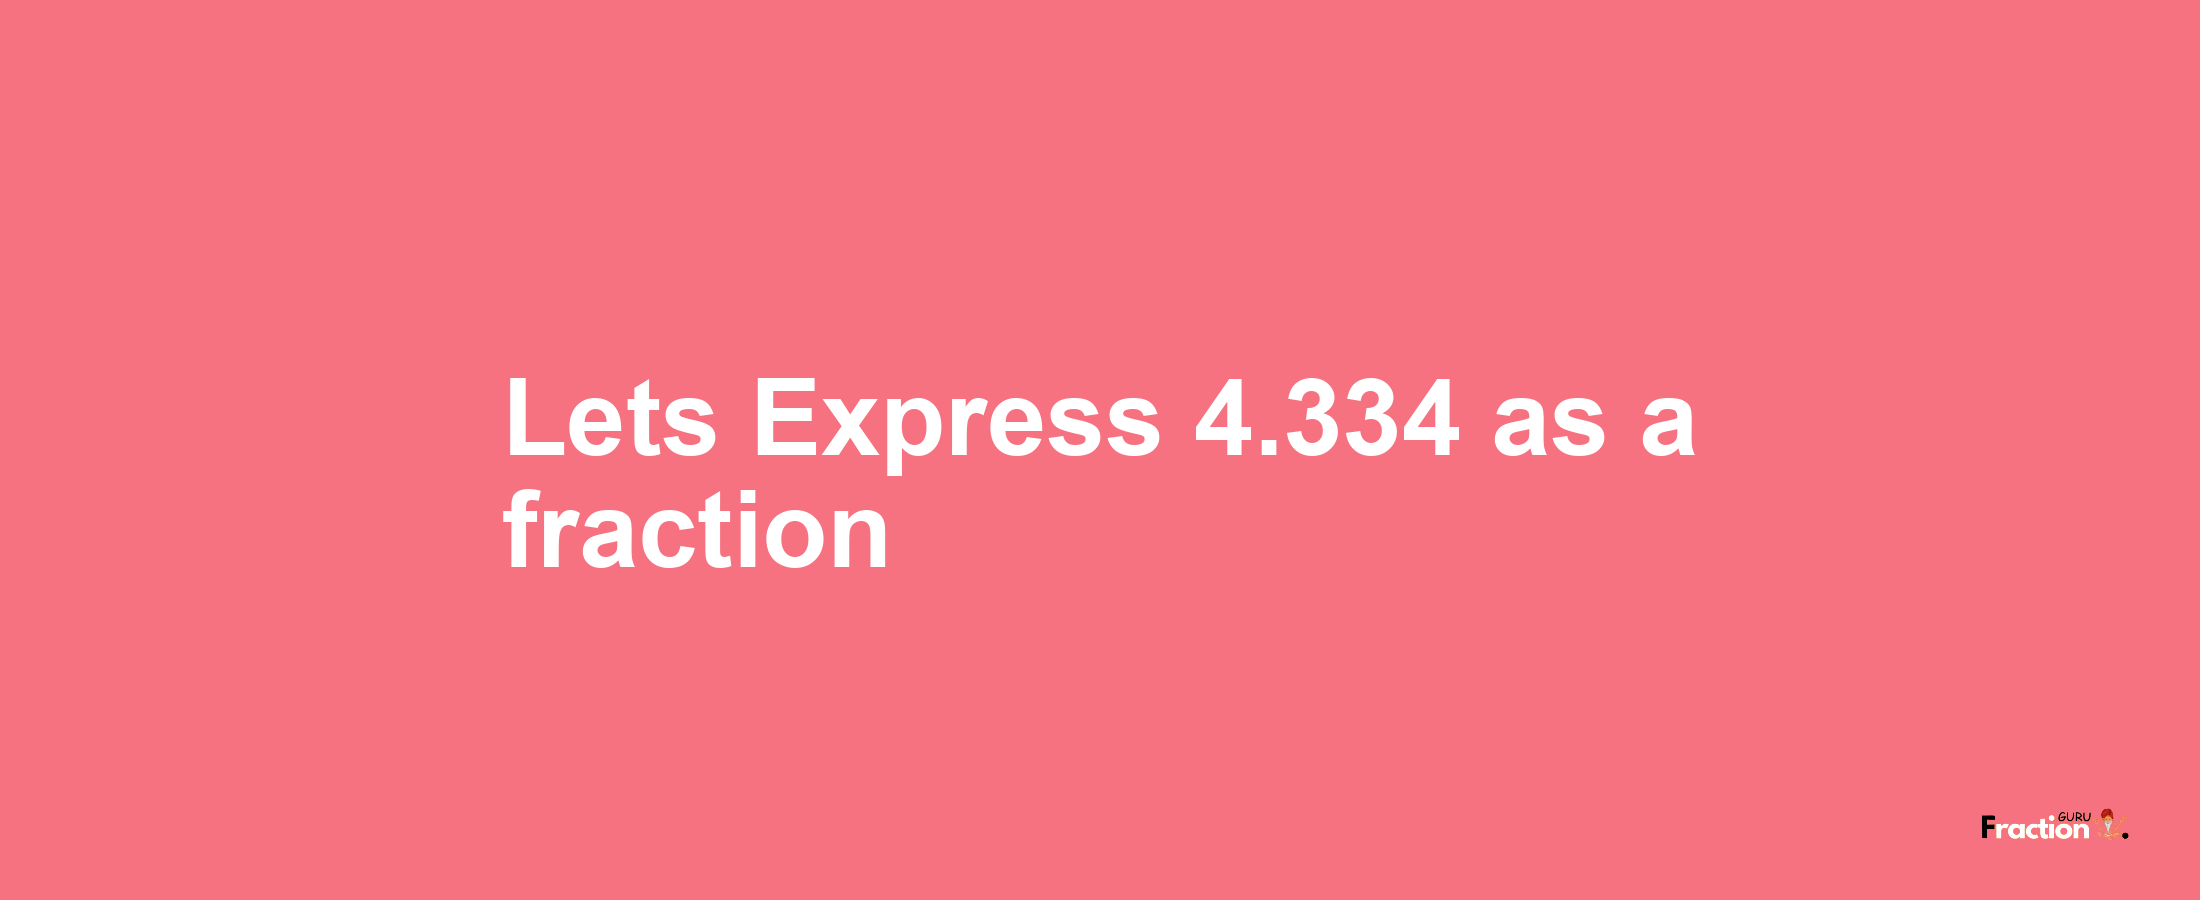 Lets Express 4.334 as afraction